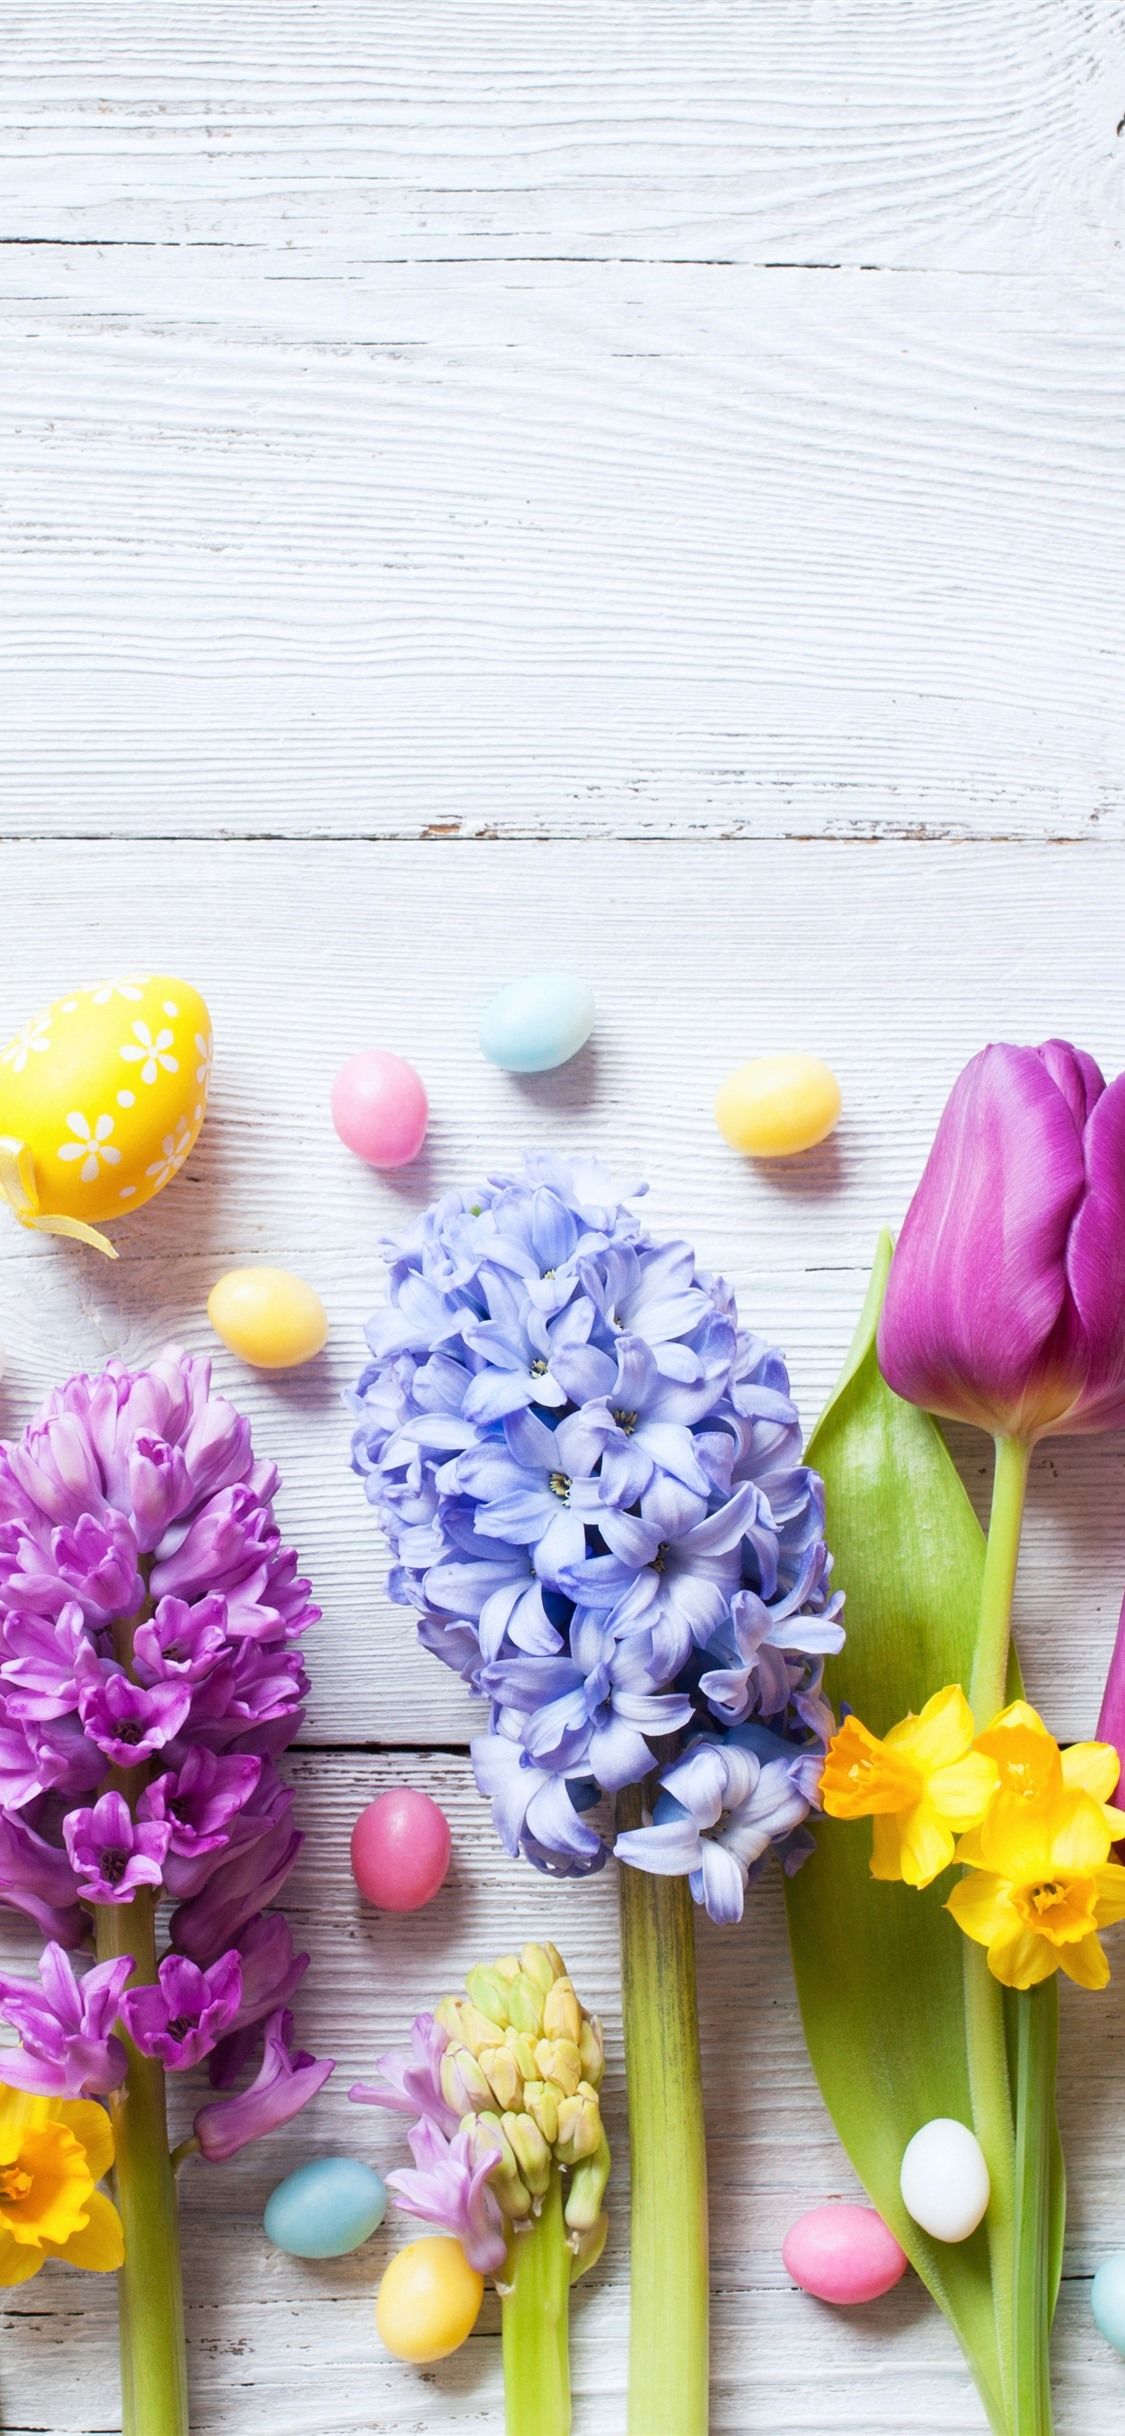 Easter, Colorful Flowers, Daffodils, Tulips, Hyacinth, Eggs 1125x2436 IPhone 11 Pro XS X Wallpaper, Background, Picture, Image